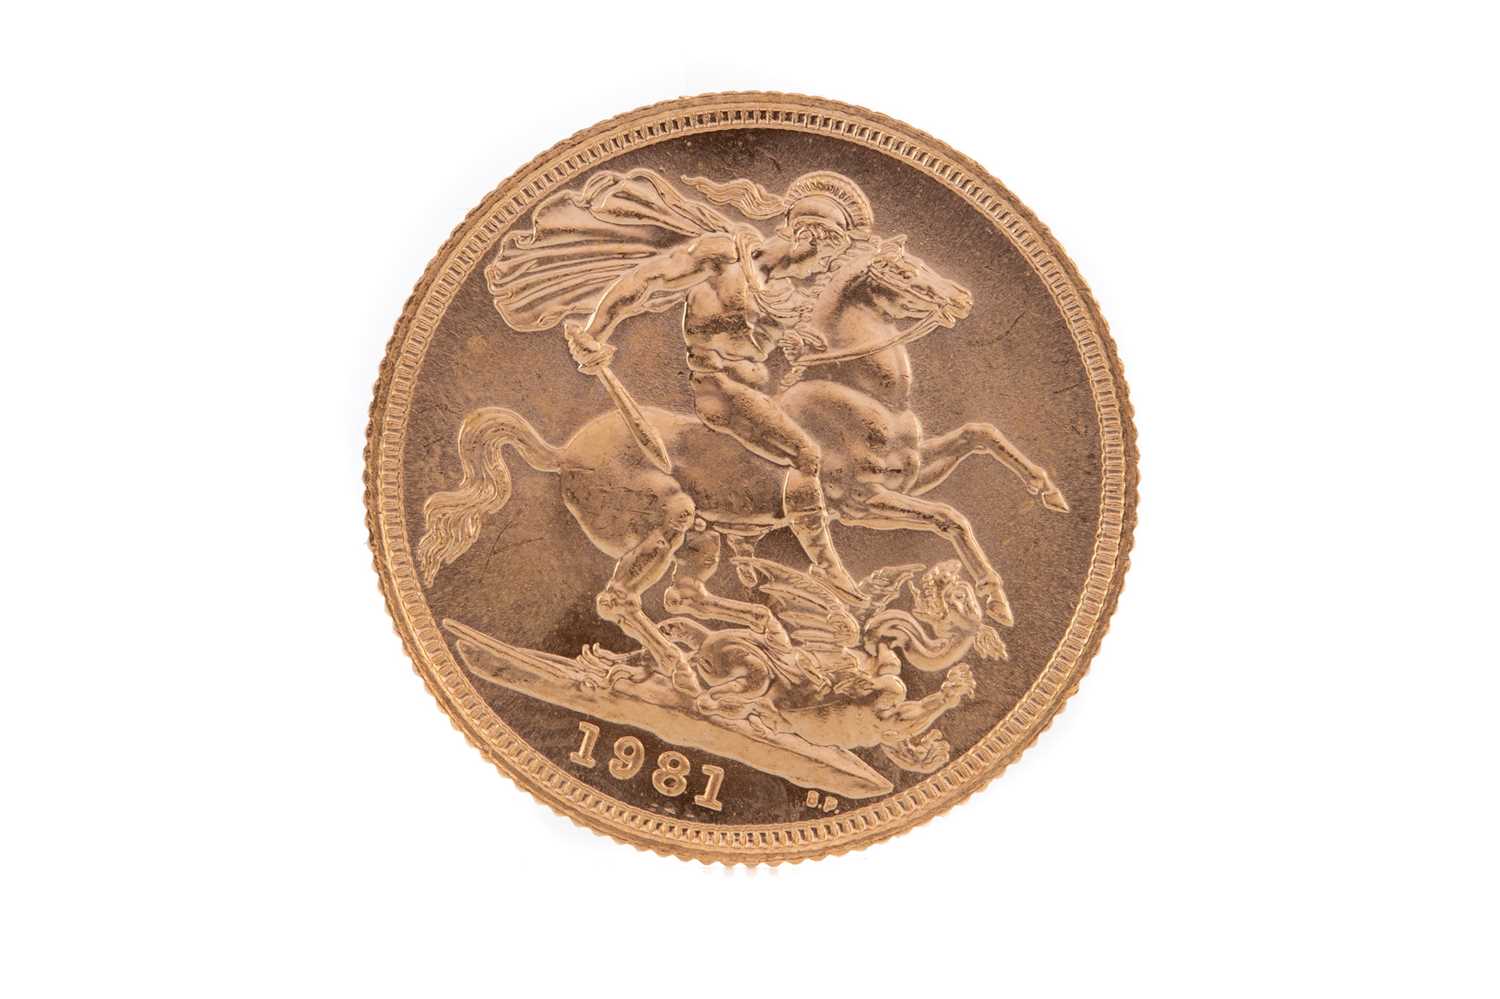 Lot 94 - AN ELIZABETH II GOLD SOVEREIGN DATED 1981